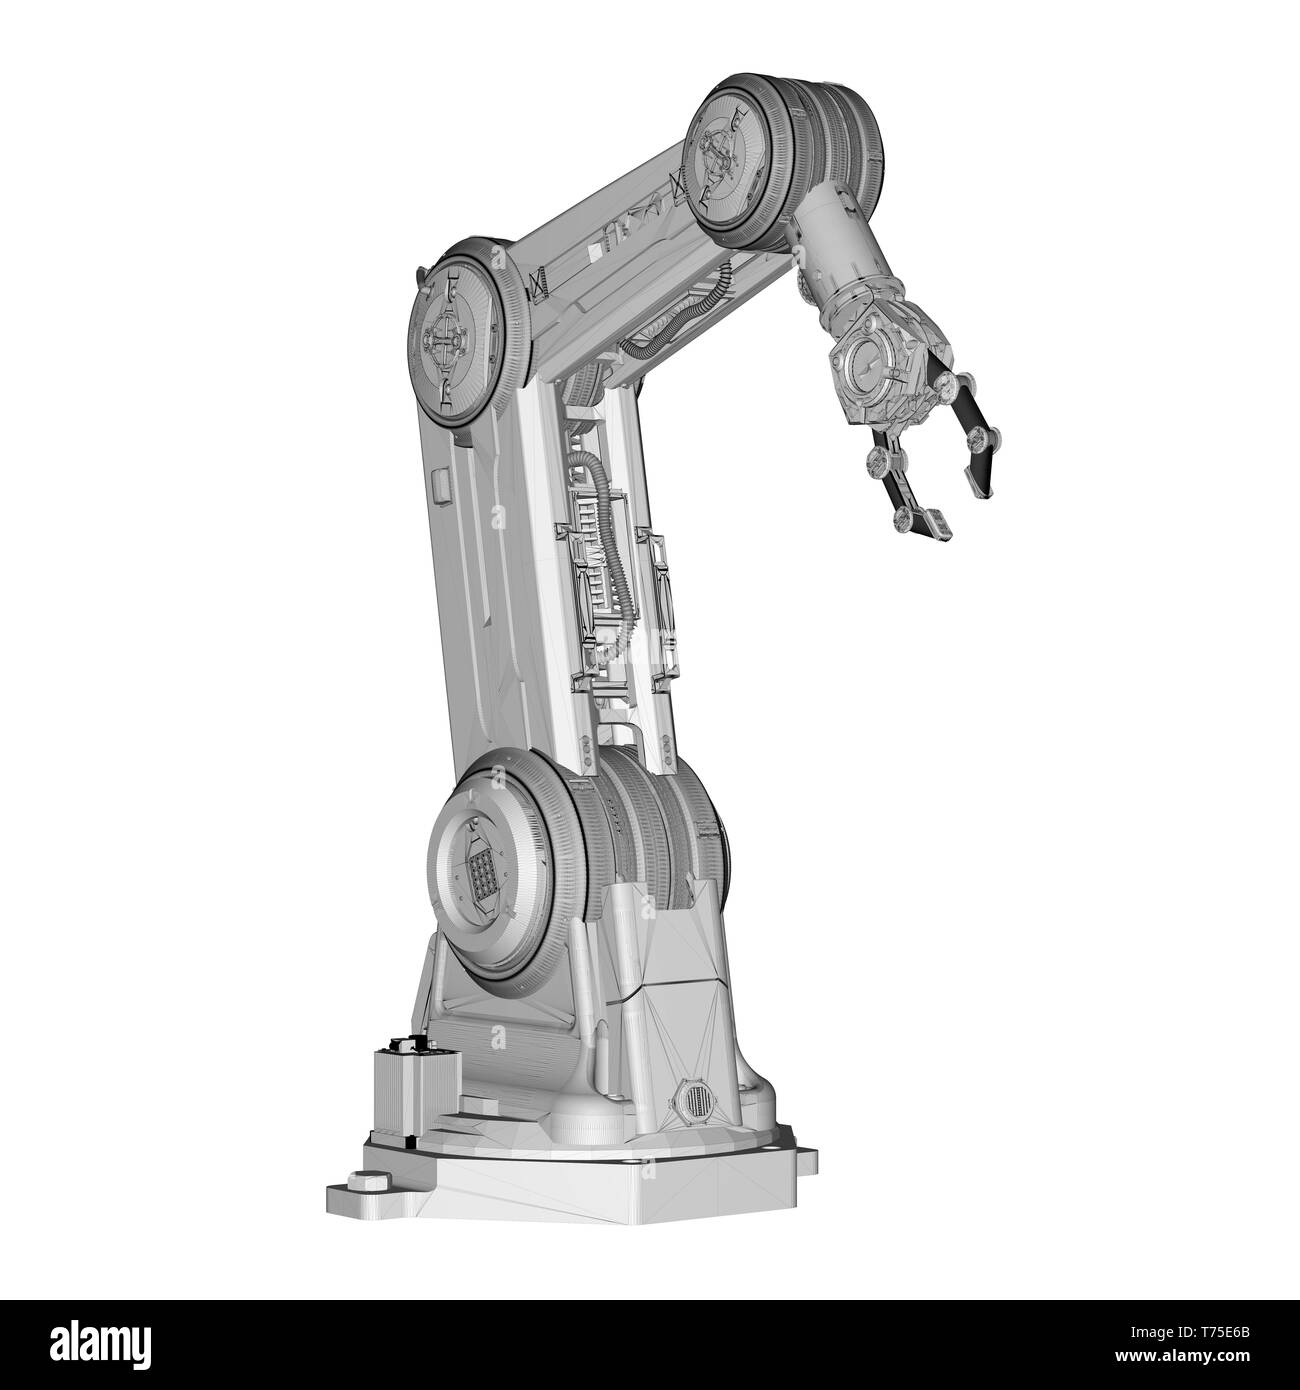 Robotic arm factory Black and White Stock Photos & Images - Alamy